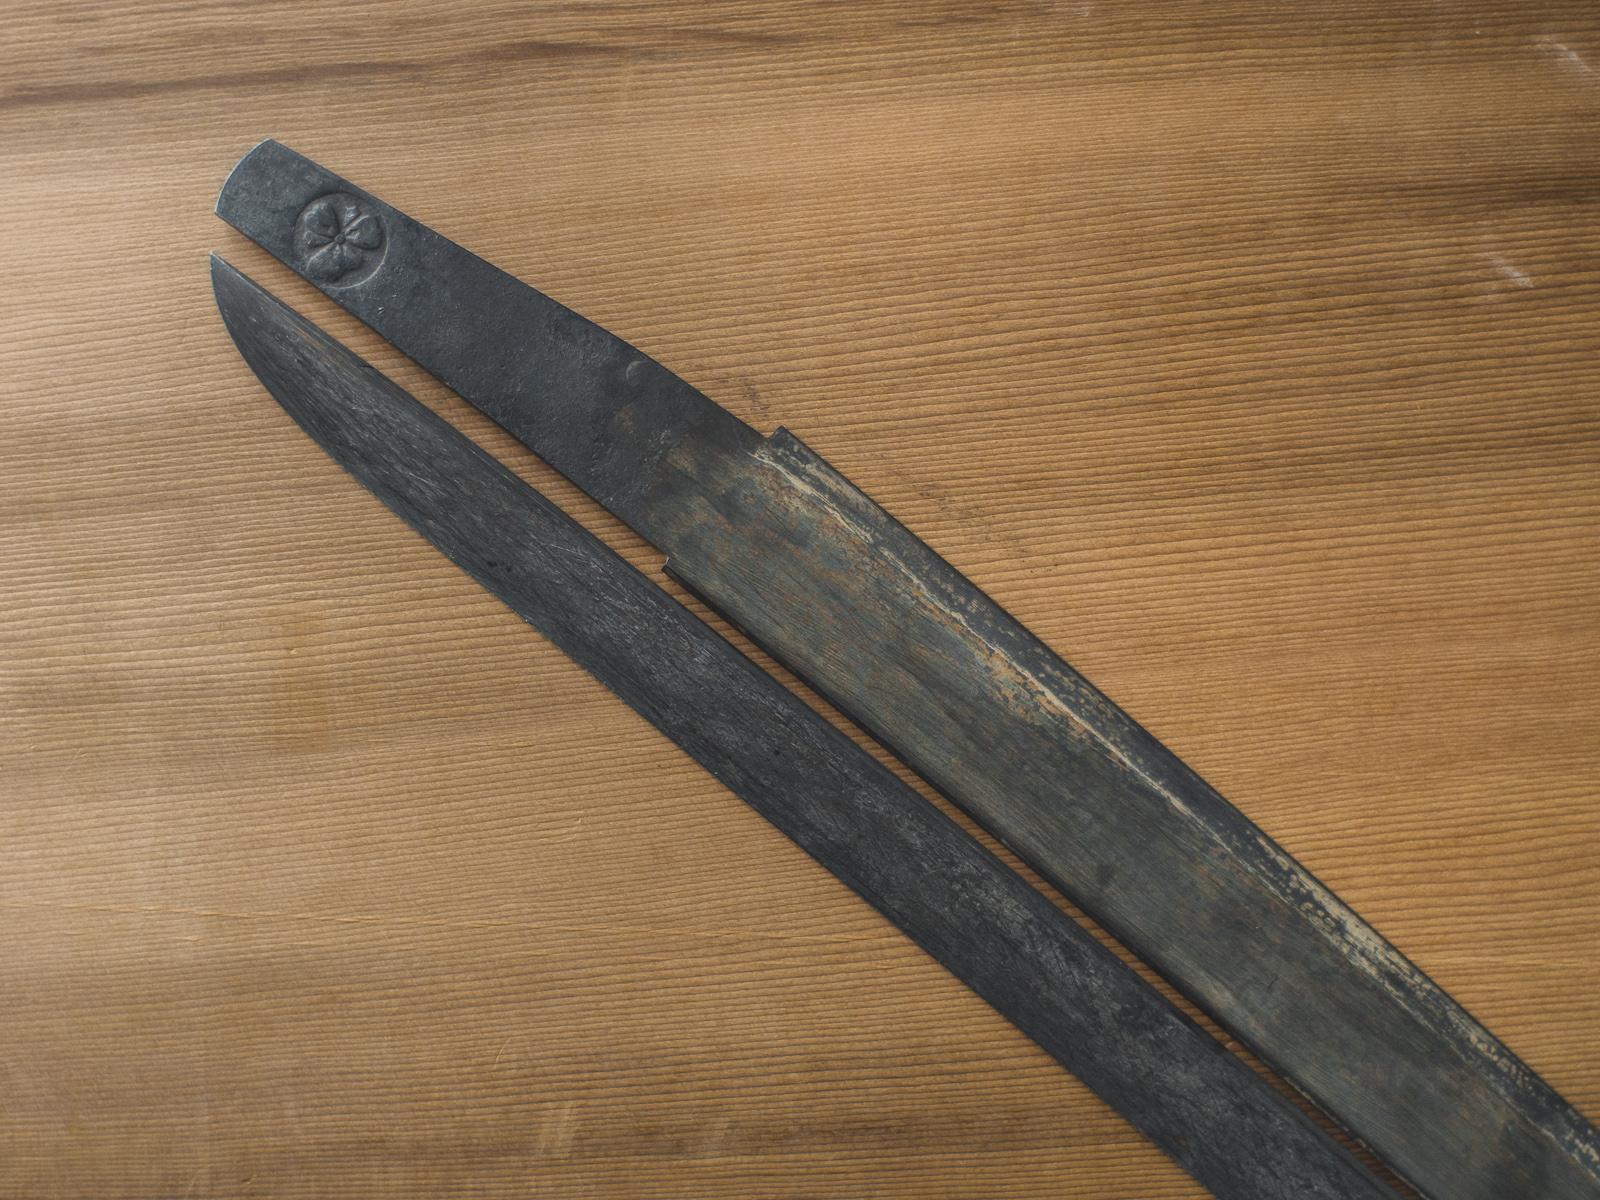 Island Blacksmith: Hand crafted tanto made from reclaimed steel using traditional techniques